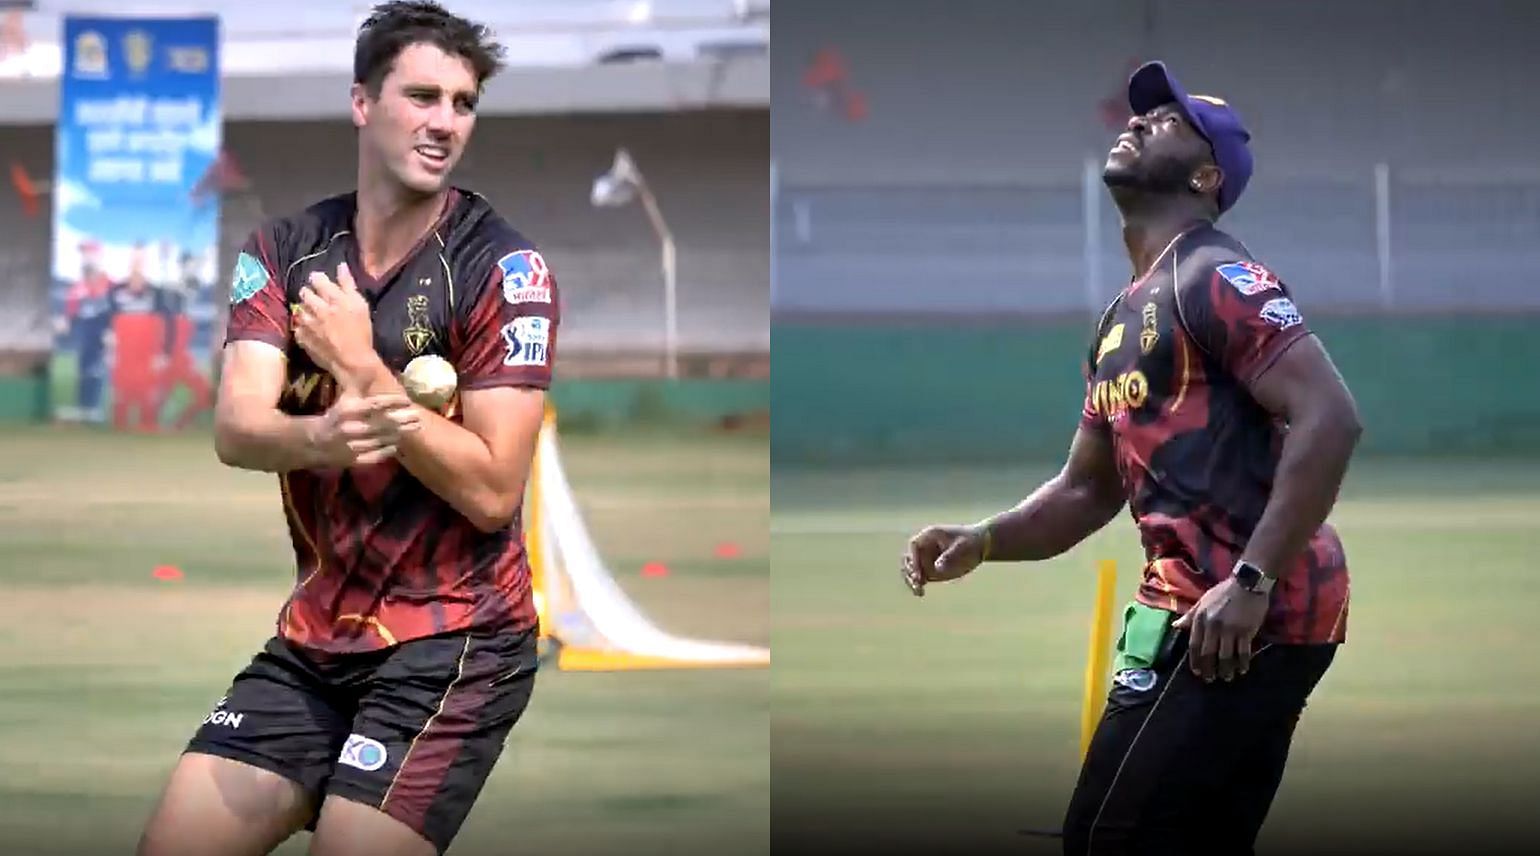 Pat Cummins (left) and Andre Russell taking the &lsquo;popcorn&rsquo; challenge. Pics: KKR/ Twitter